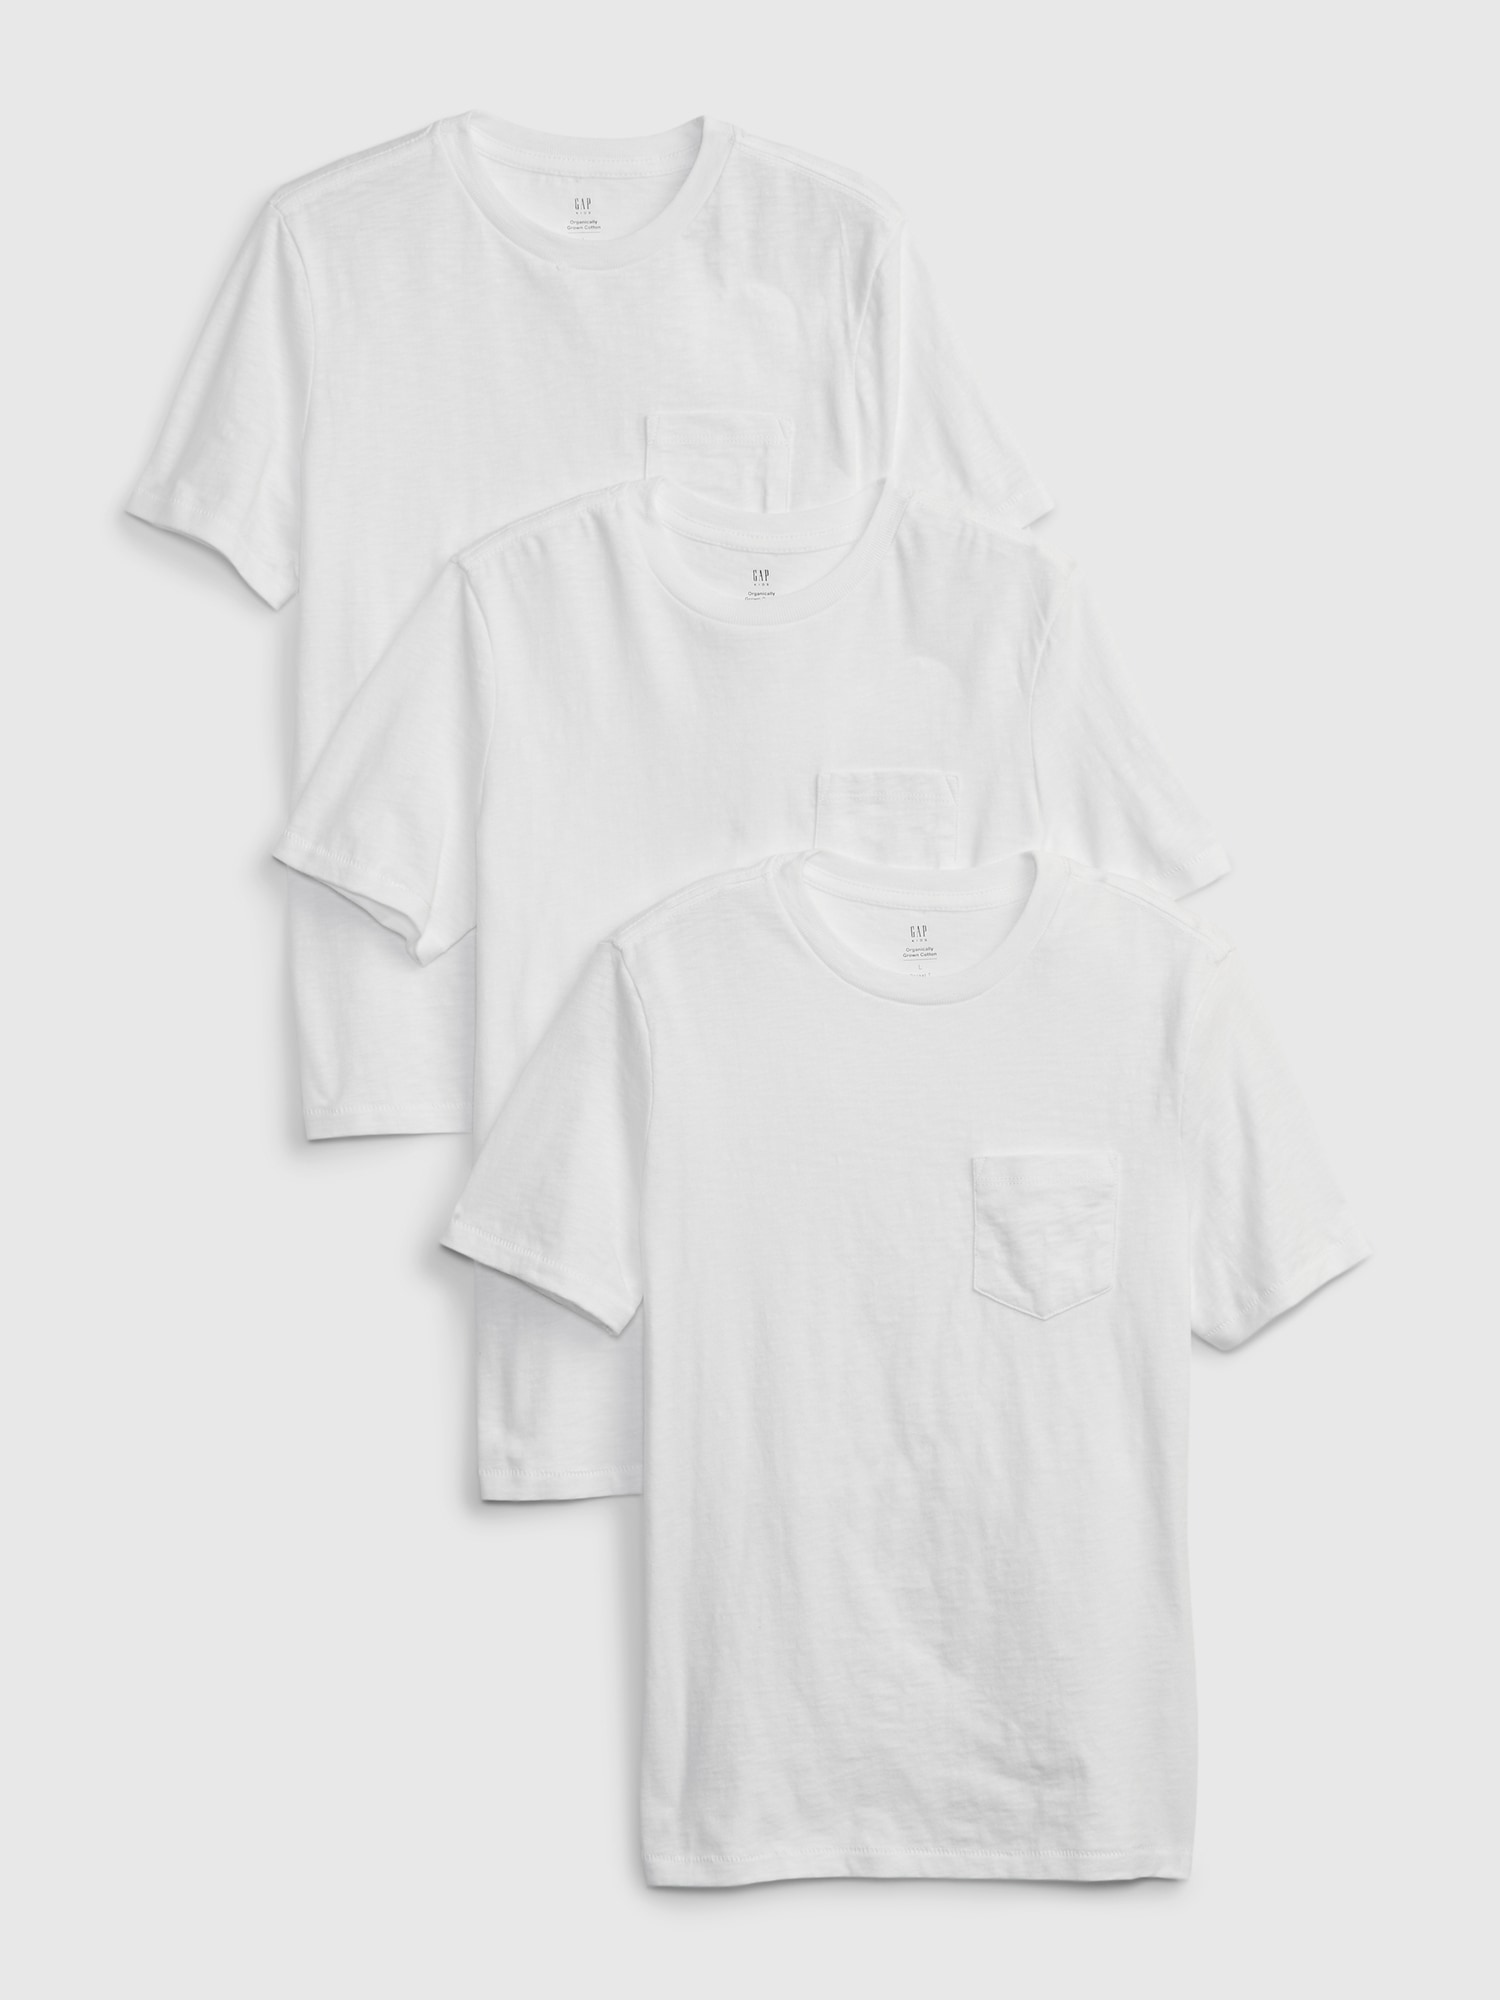 Boys' Pocket T-Shirt (3-pack) by Gap White Size S (6/7)